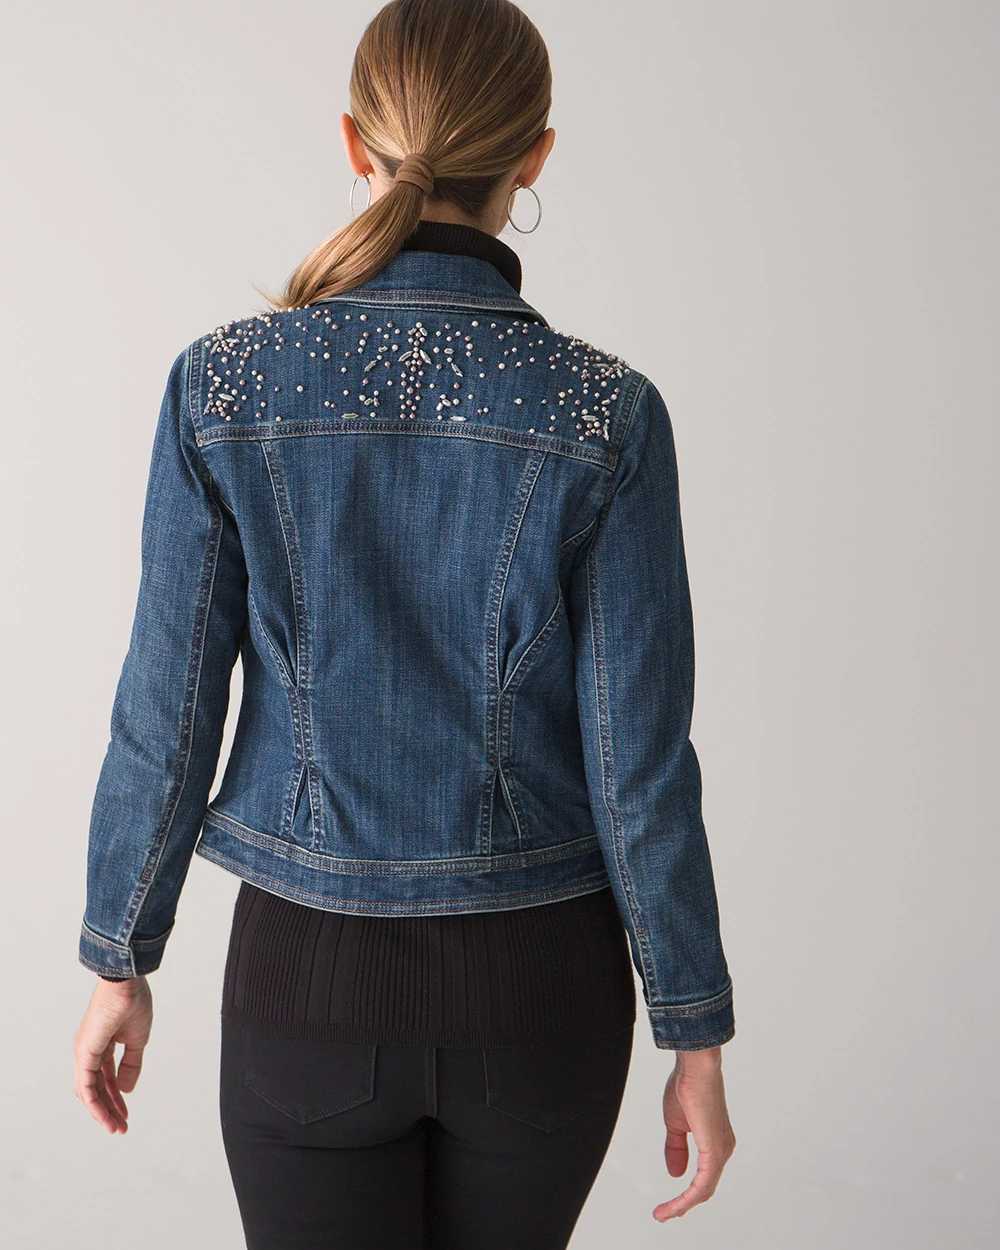 Petite Pearl Embellished Trucker Jean Jacket click to view larger image.